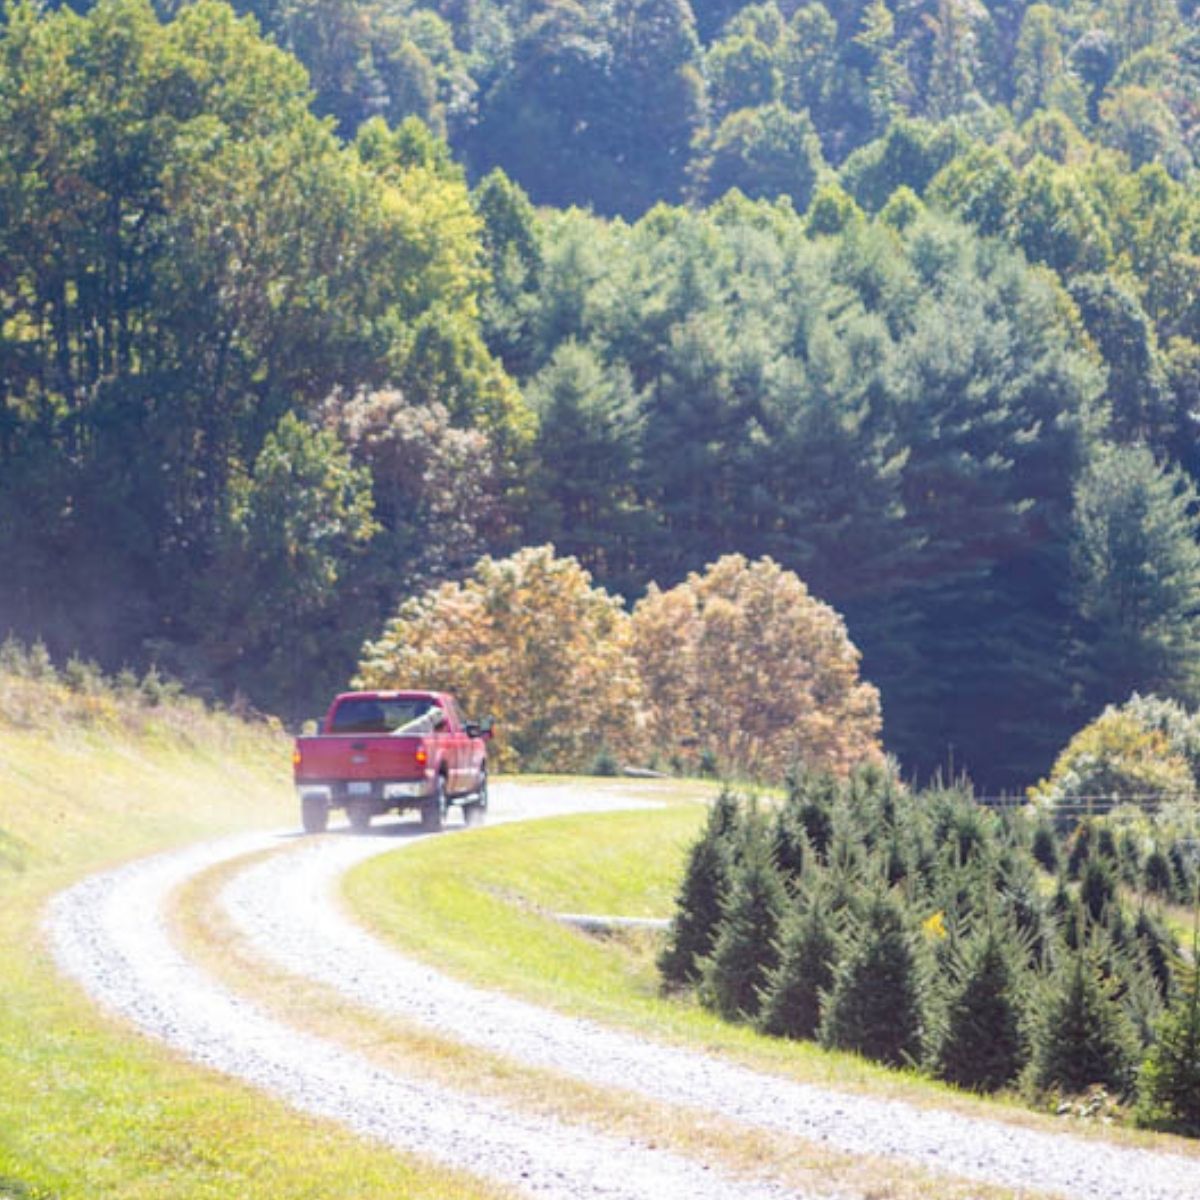 A classic red truck is driving around the bend of a Christmas tree farm in the mountains of North Carolina